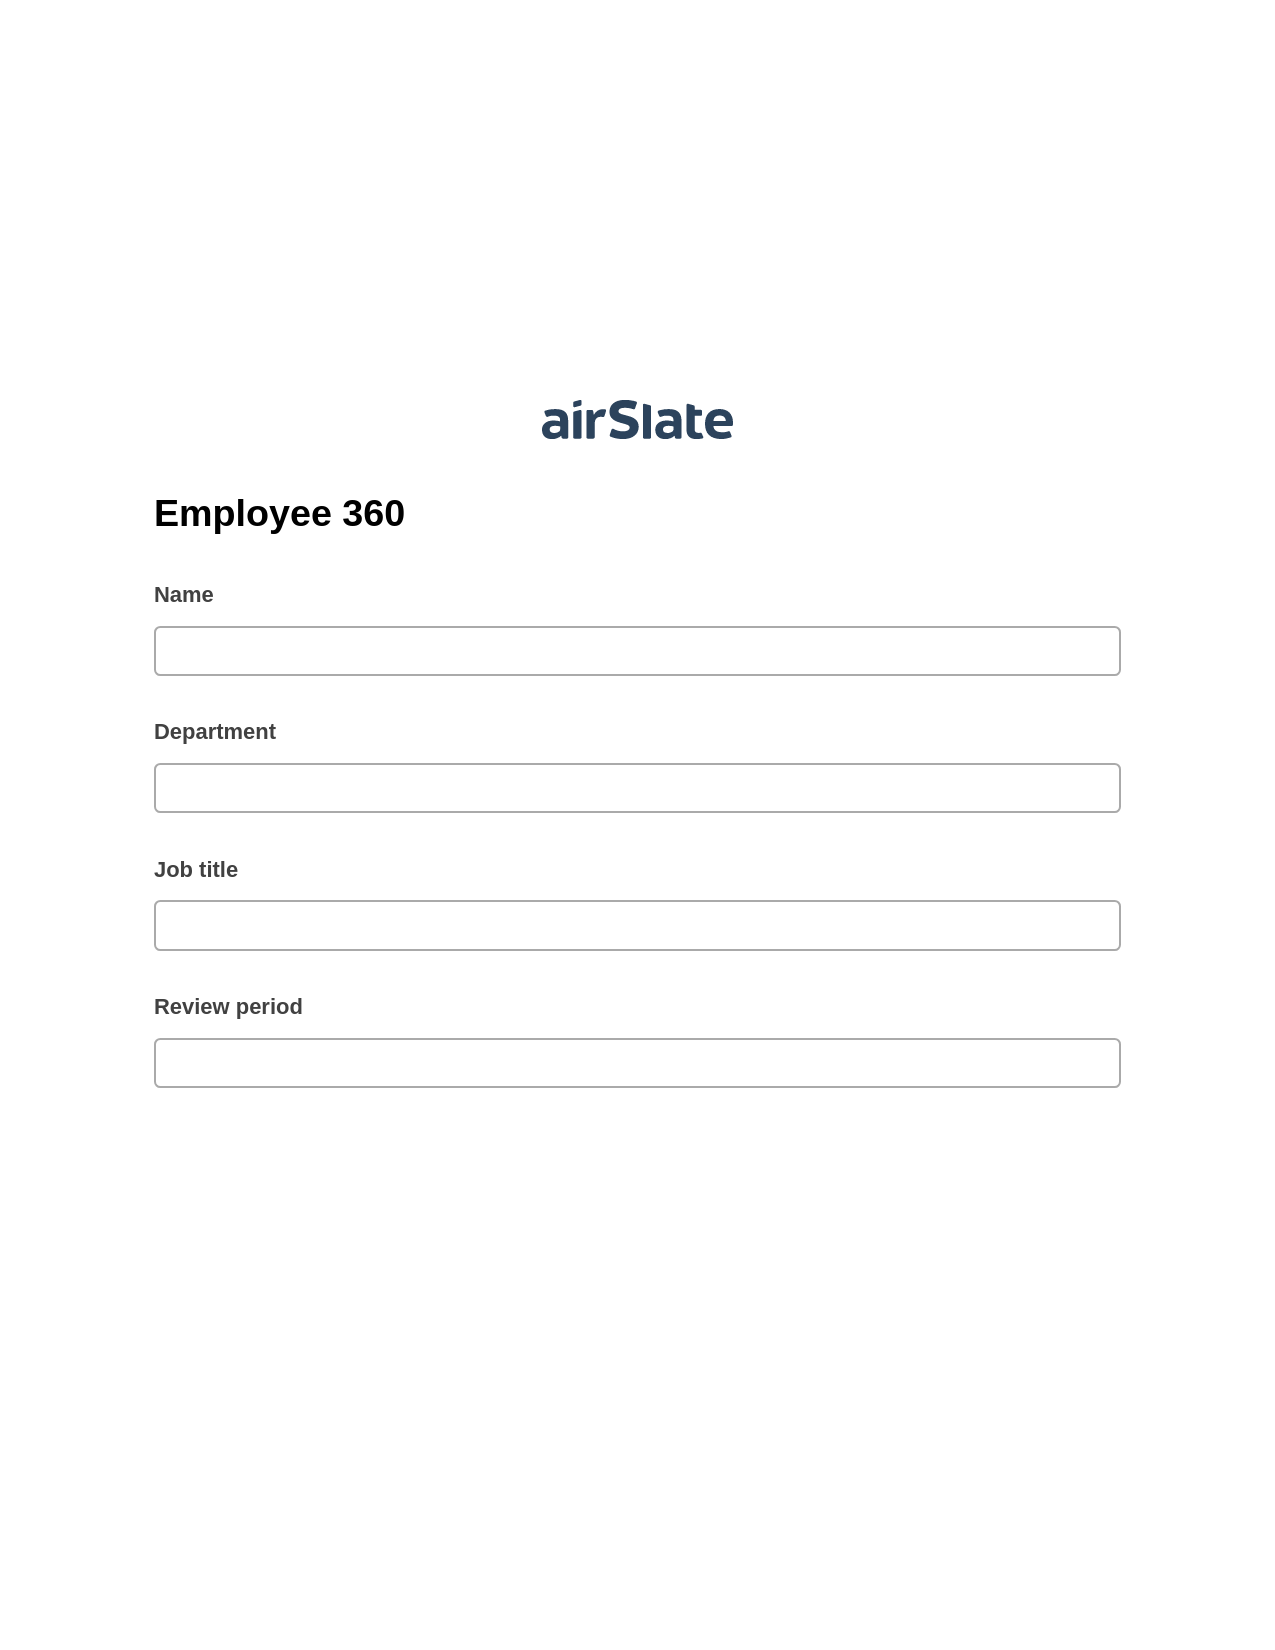 Employee 360 Pre-fill from Google Sheets Bot, Update MS Dynamics 365 Record Bot, Export to Google Sheet Bot